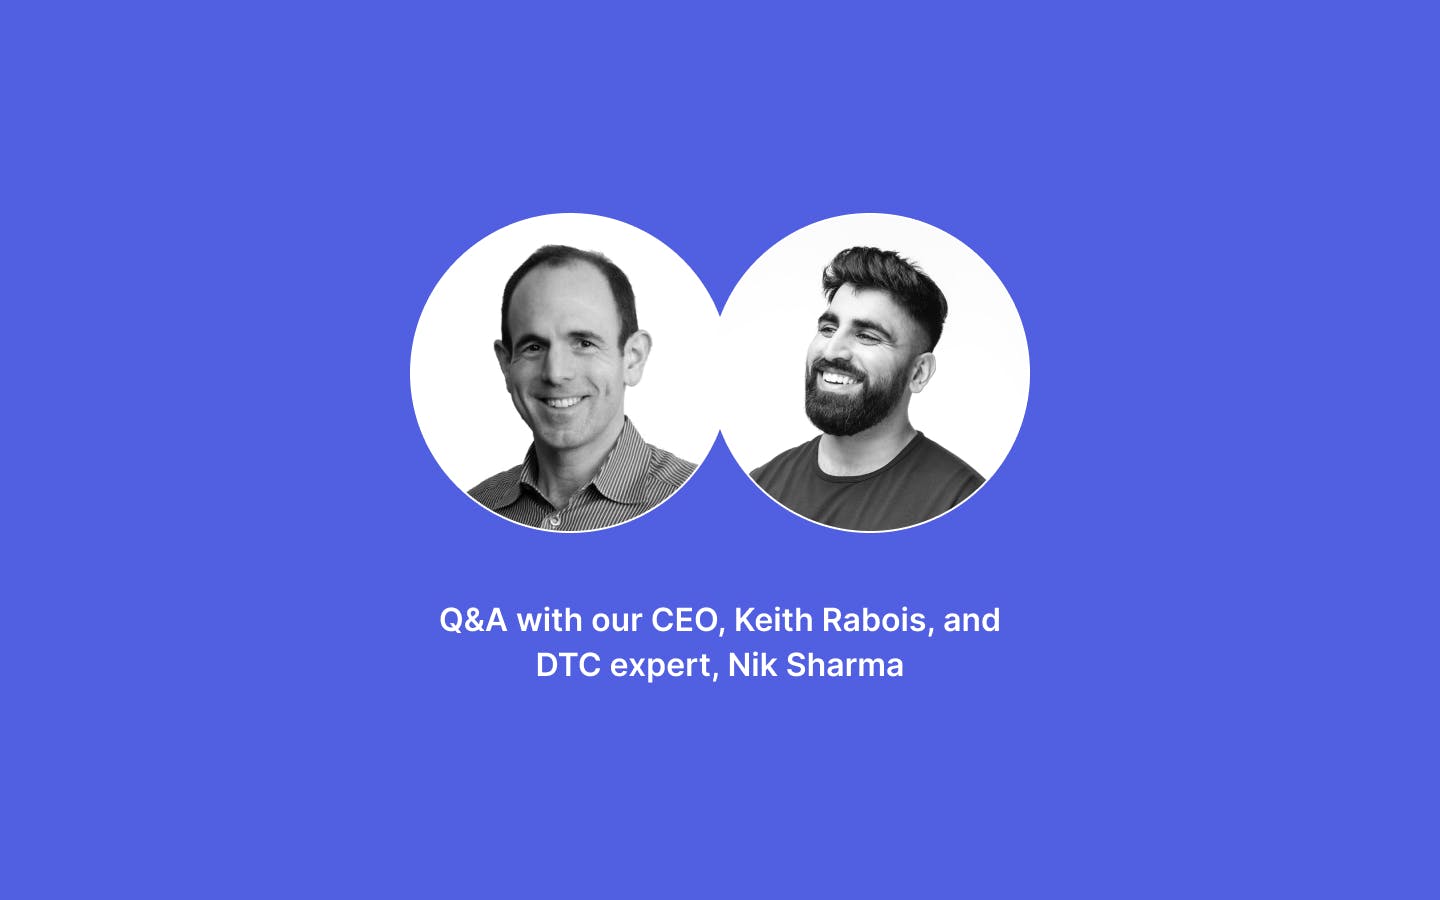 Keith Rabois (left) and Nik Sharma (right) meeting in NYC